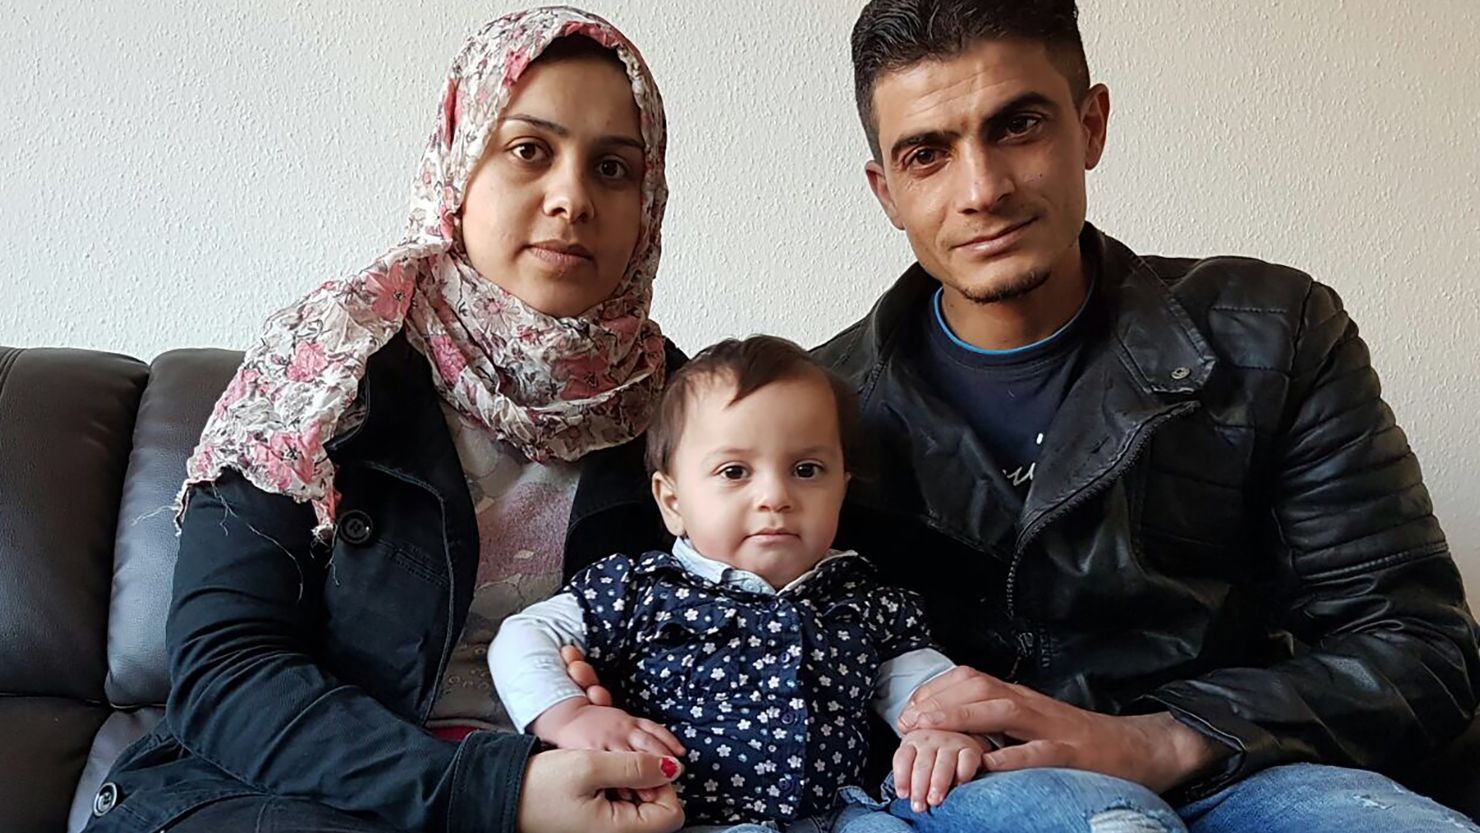 Tema Alhawar and Mamon Alhamza with baby Angela Merkel at their home in Mönchengladbach, Germany, on Friday.